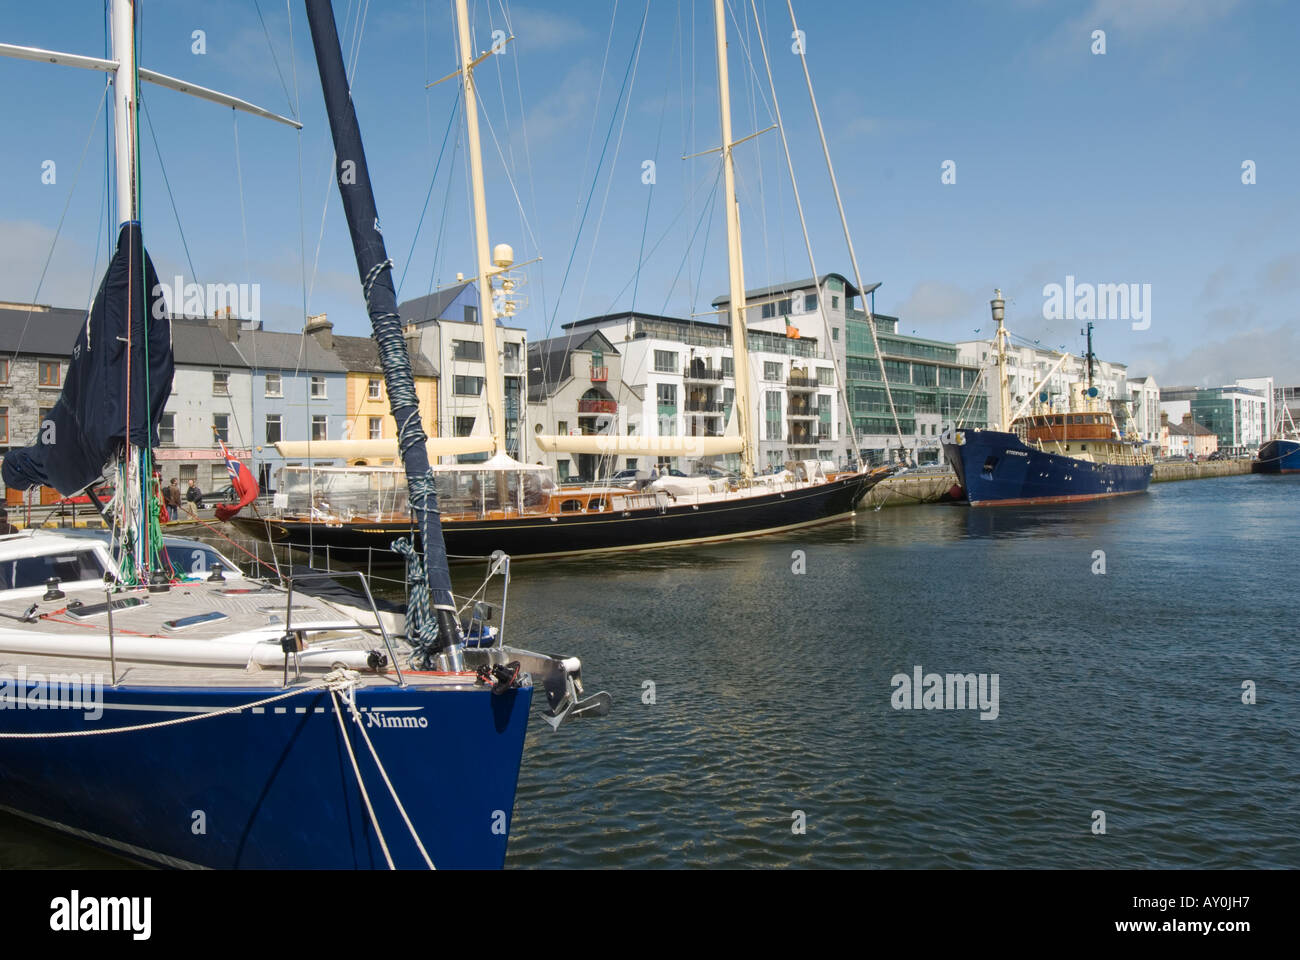 Ireland County Galway Galway City harbour Stock Photo